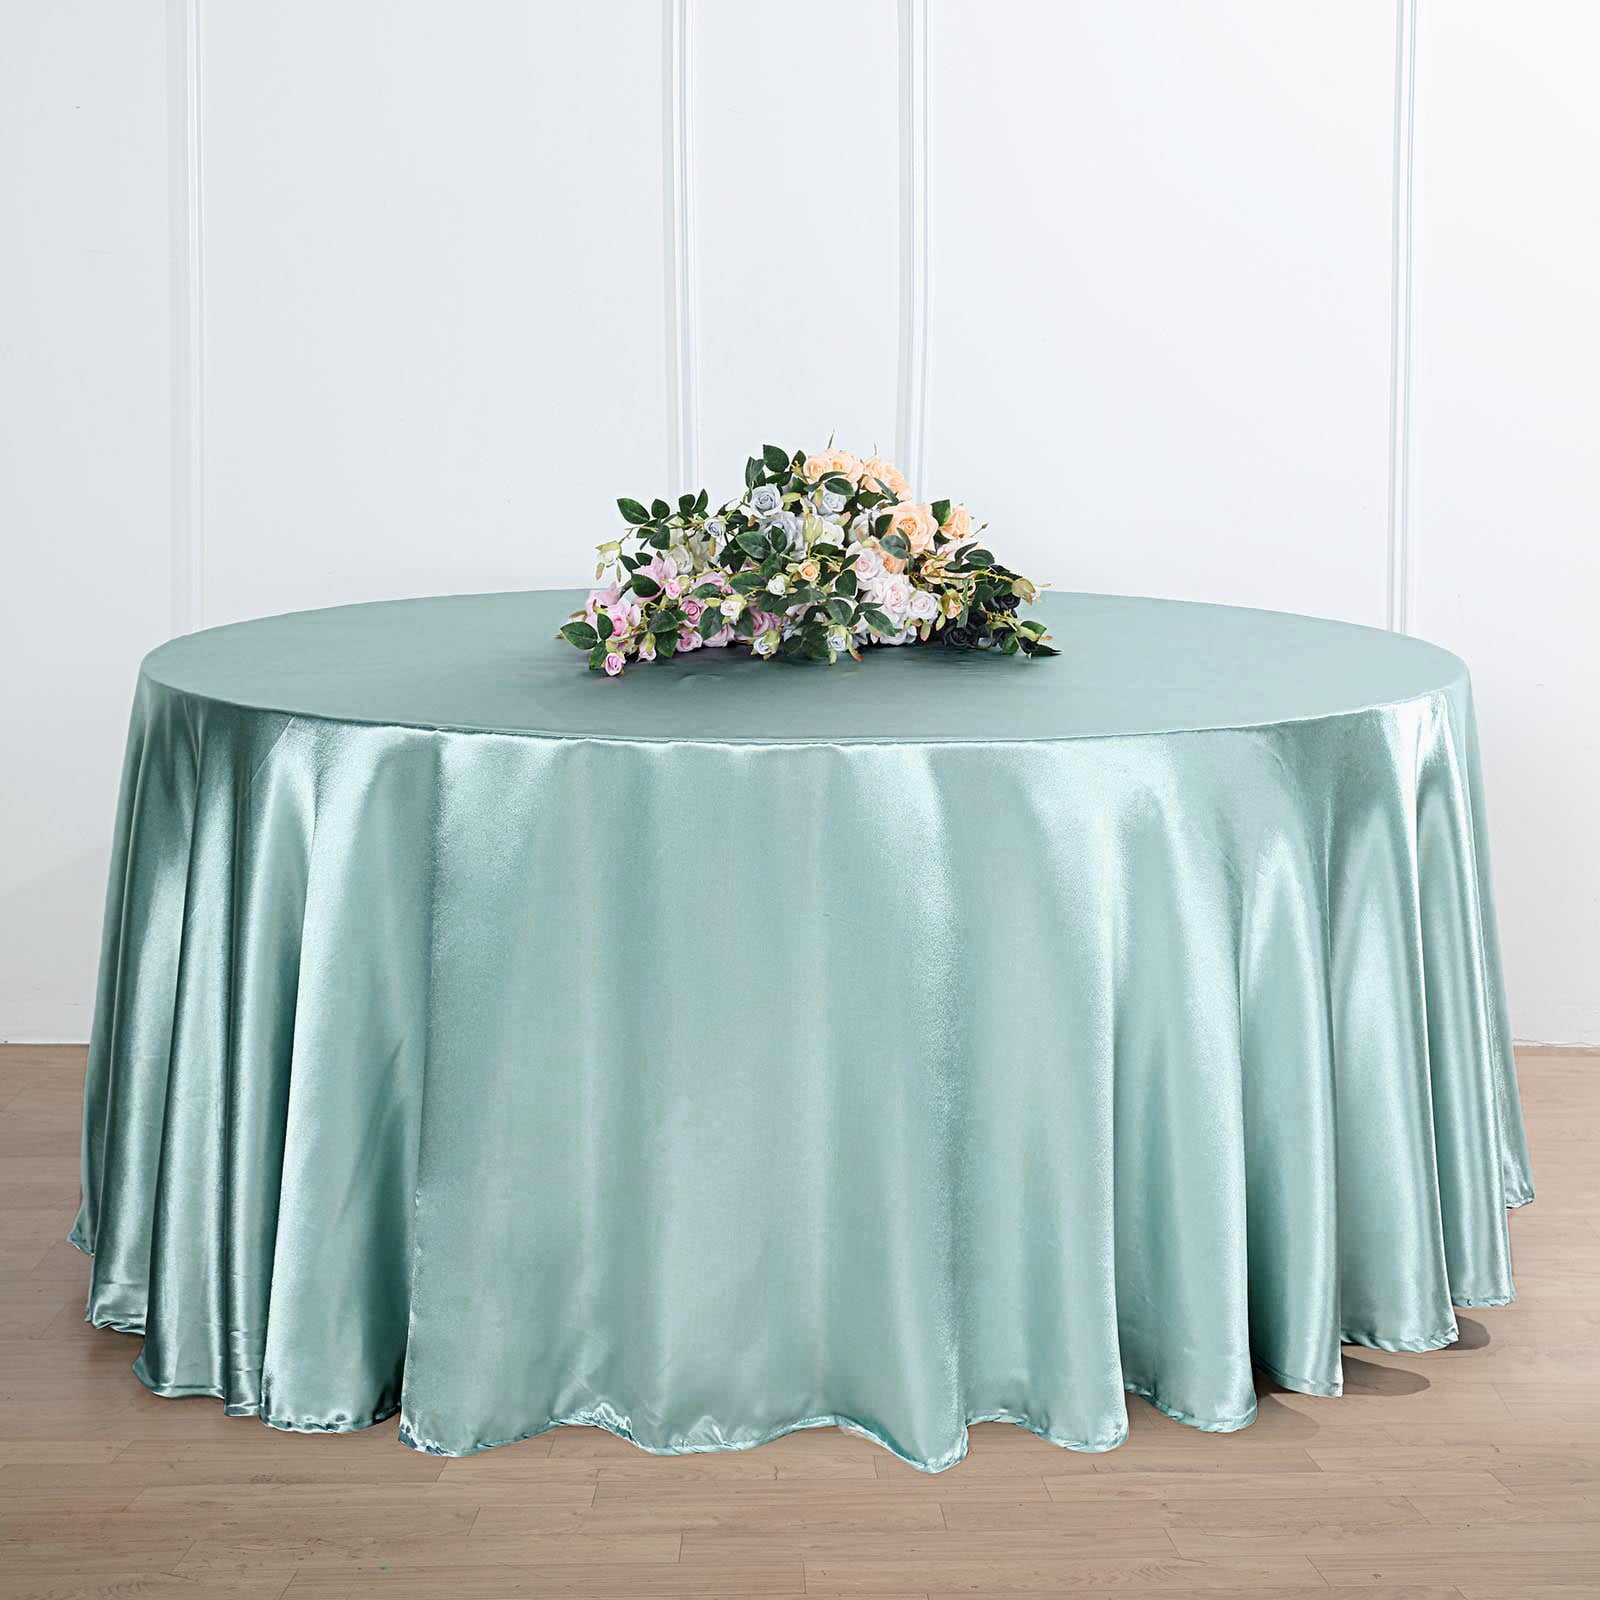 LINEN LOOK TEAL TABLE CLOTHS TURQUOISE PLAIN BIRTHDAY PARTY CHRISTMAS OCCASIONS